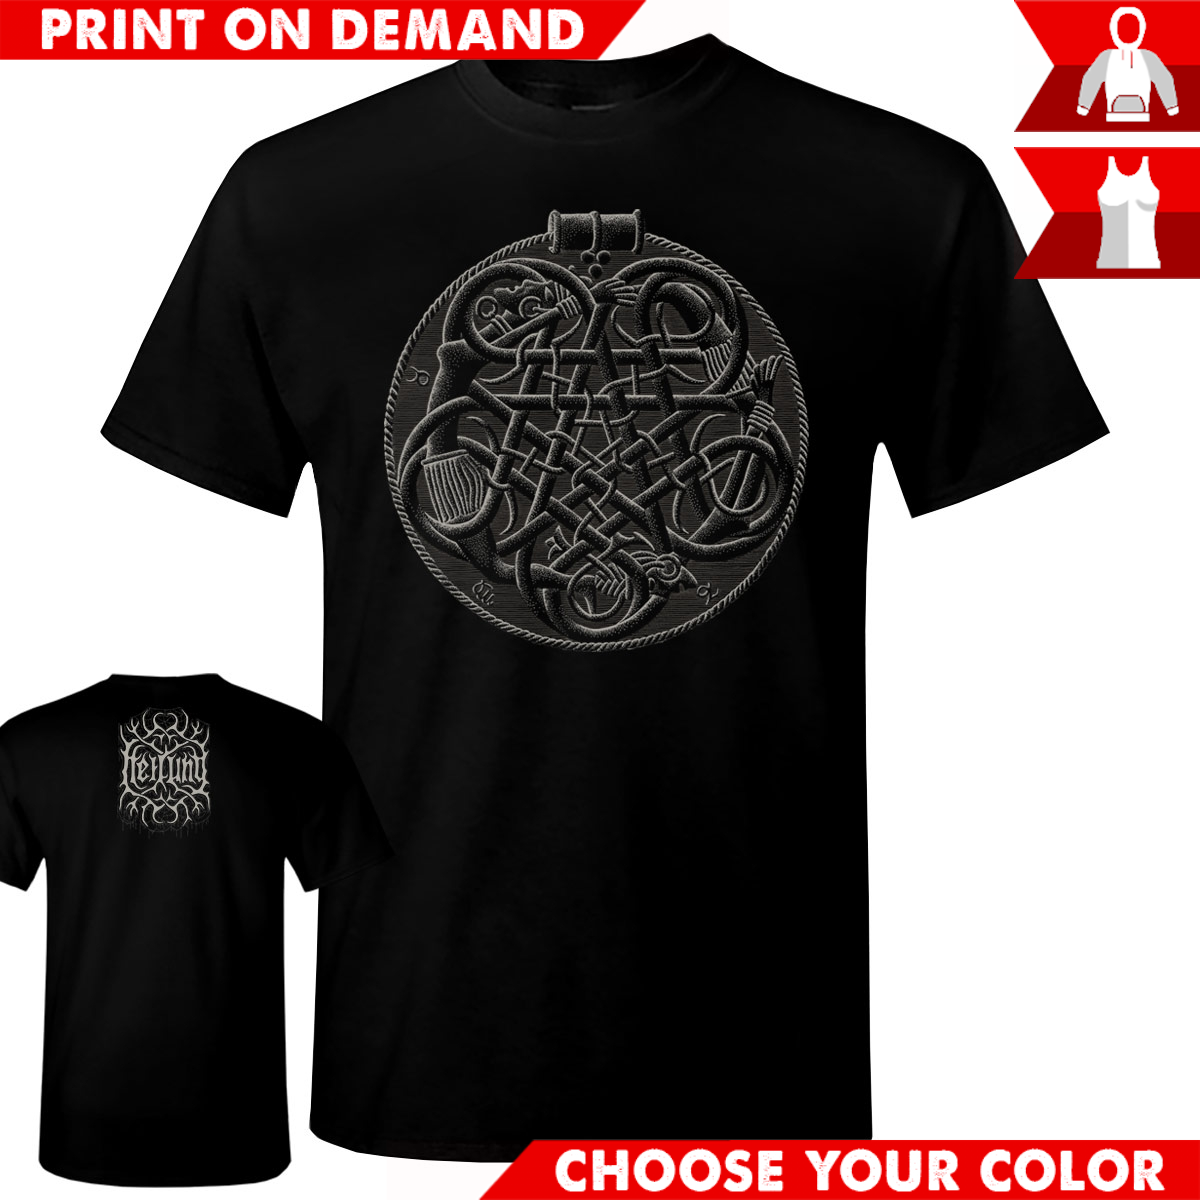 Heilung - Ace Of Coins - Print on demand